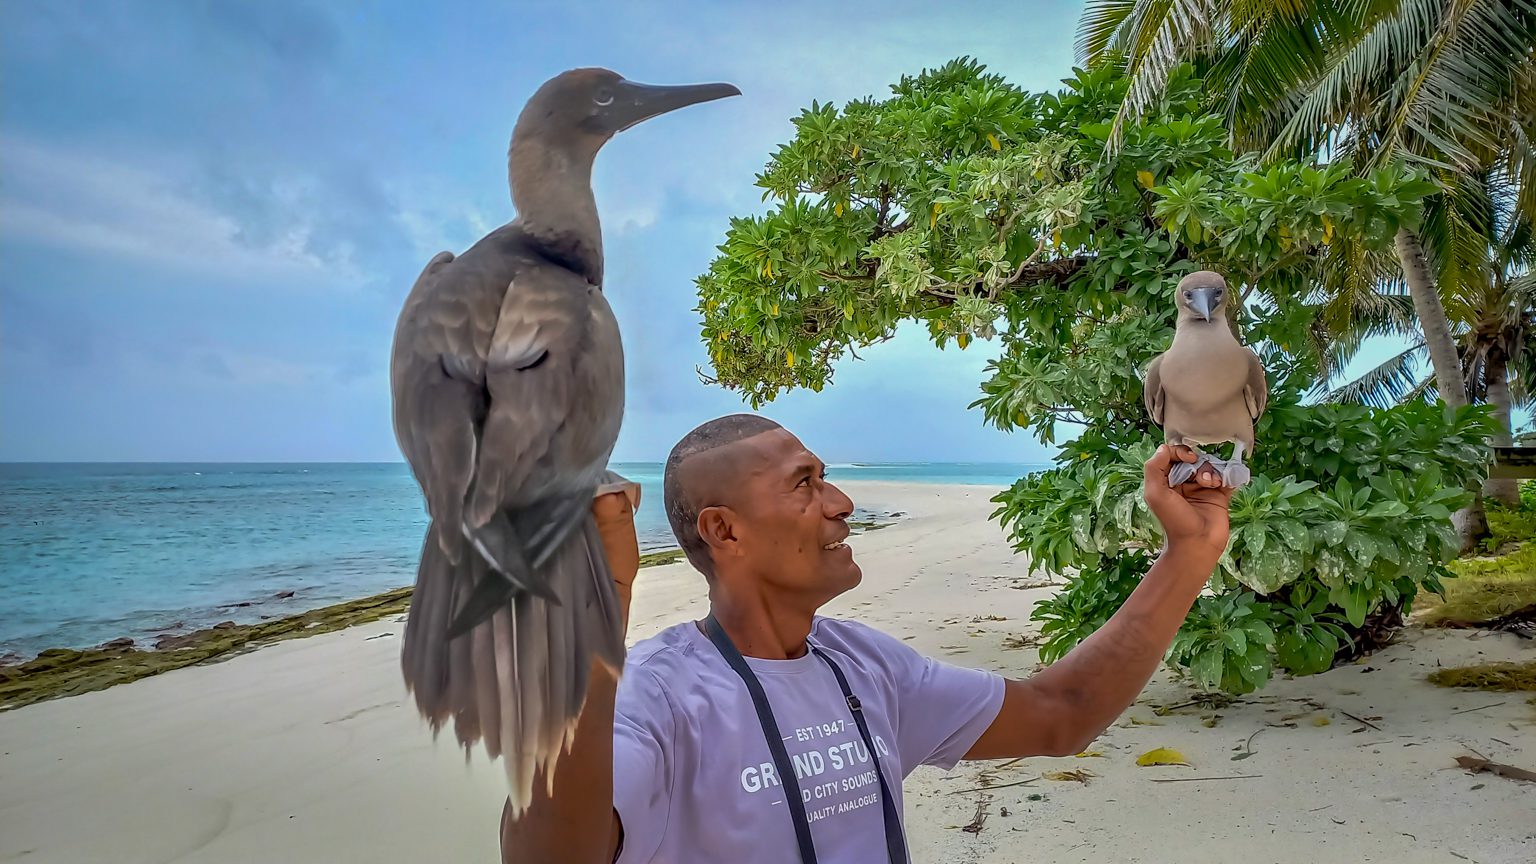 Two redfooted boobies with one of the workers on Nanuku Levu